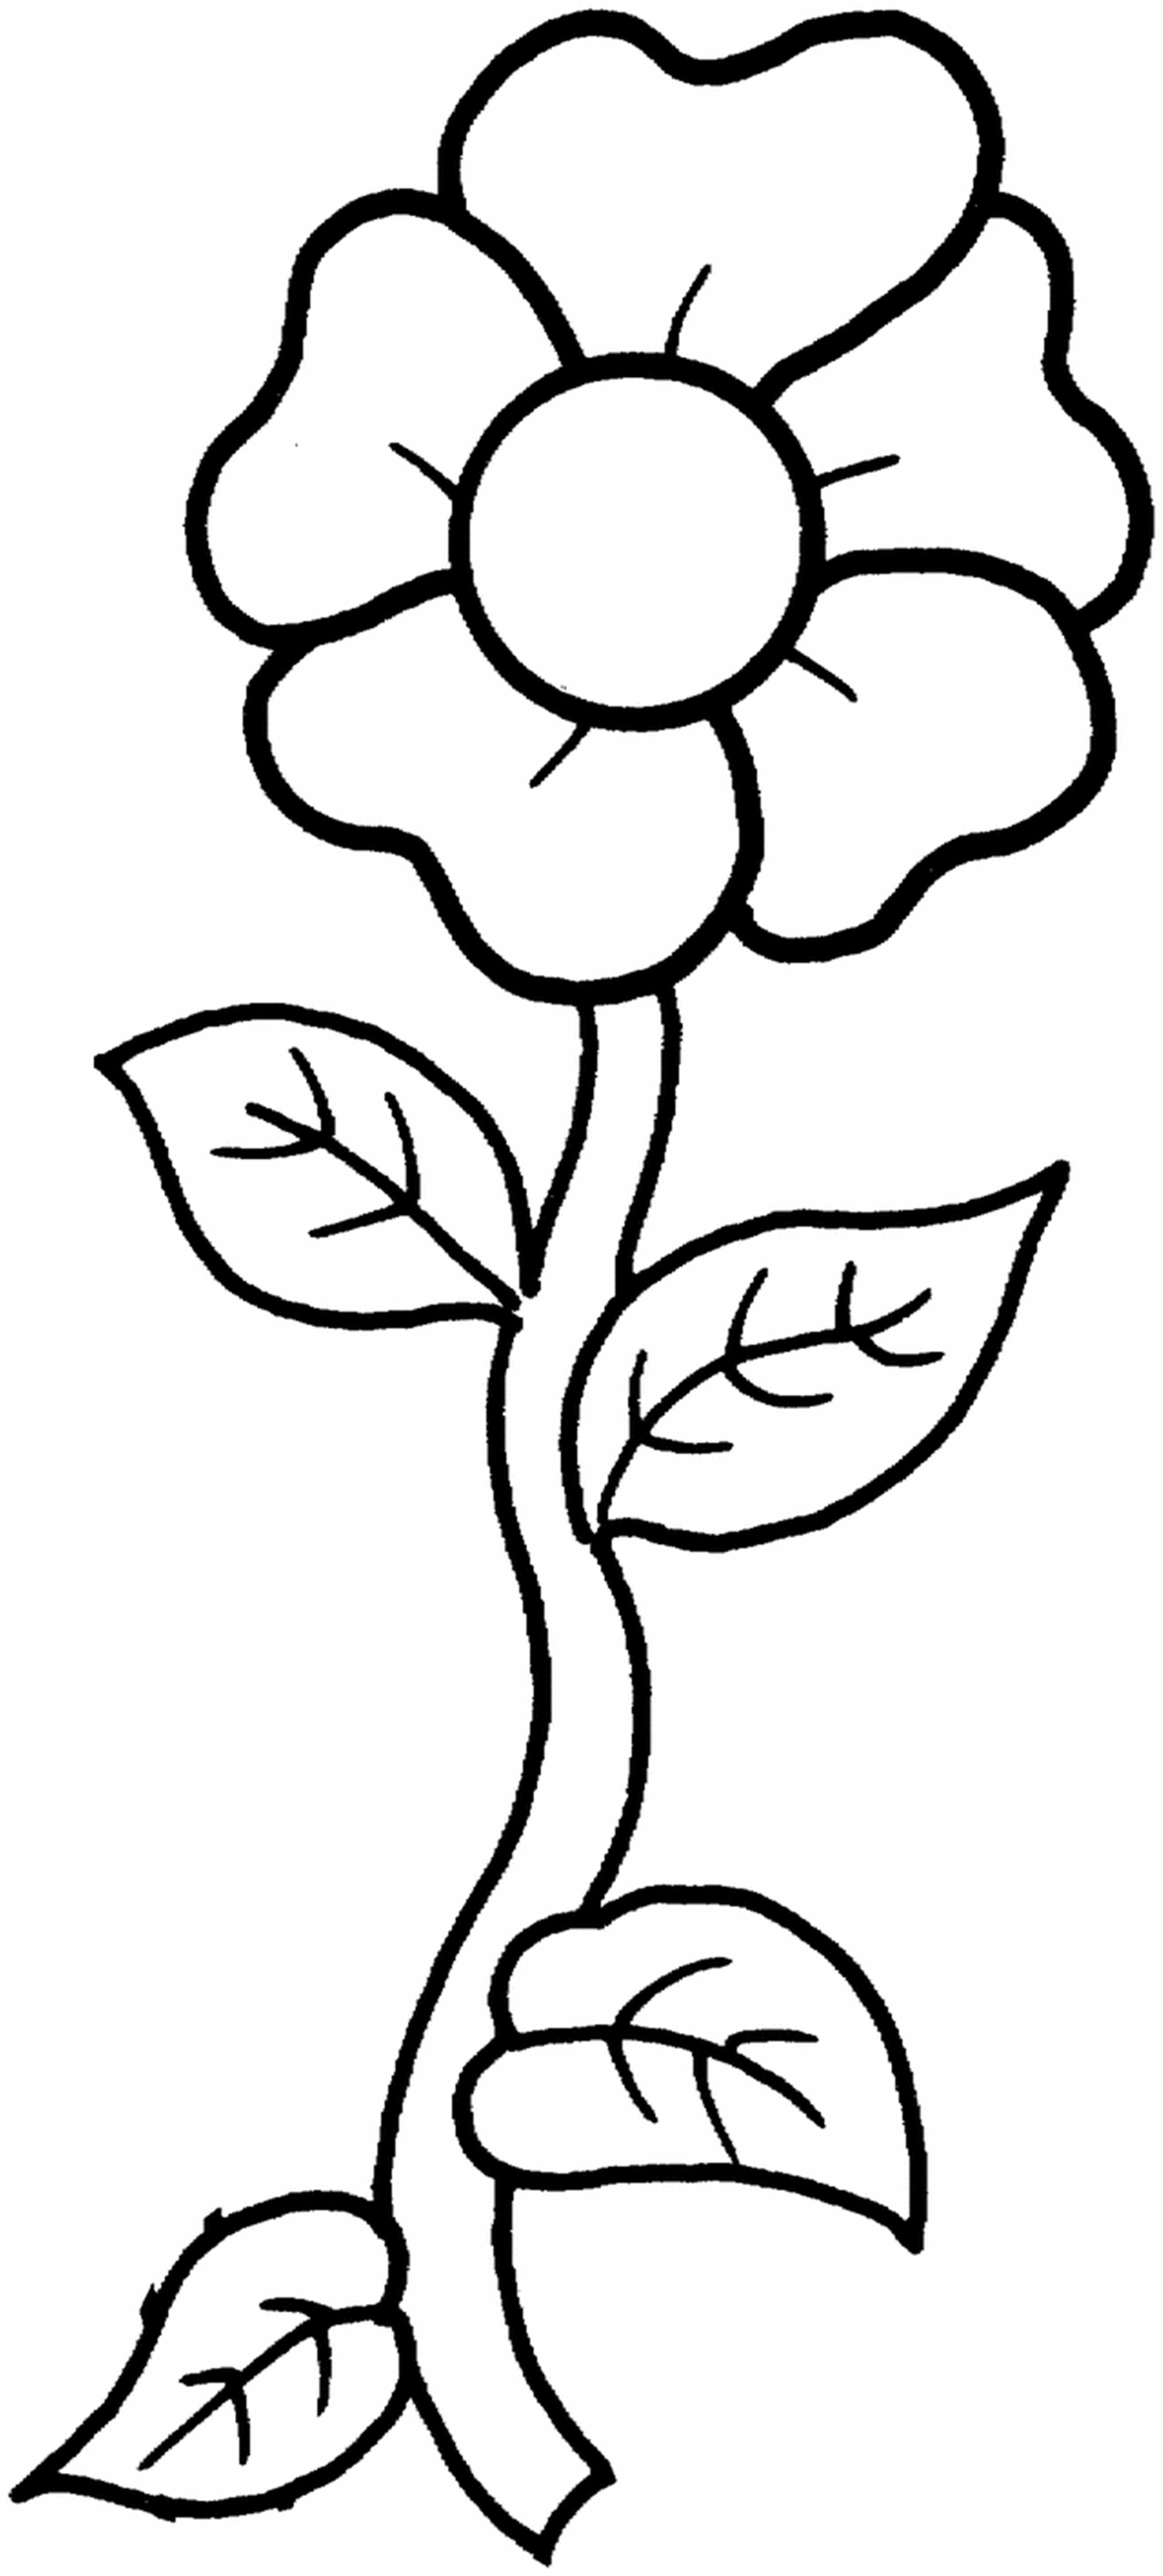 Free Flower Coloring Pages For Kids
 Free Printable Flower Coloring Pages For Kids Best